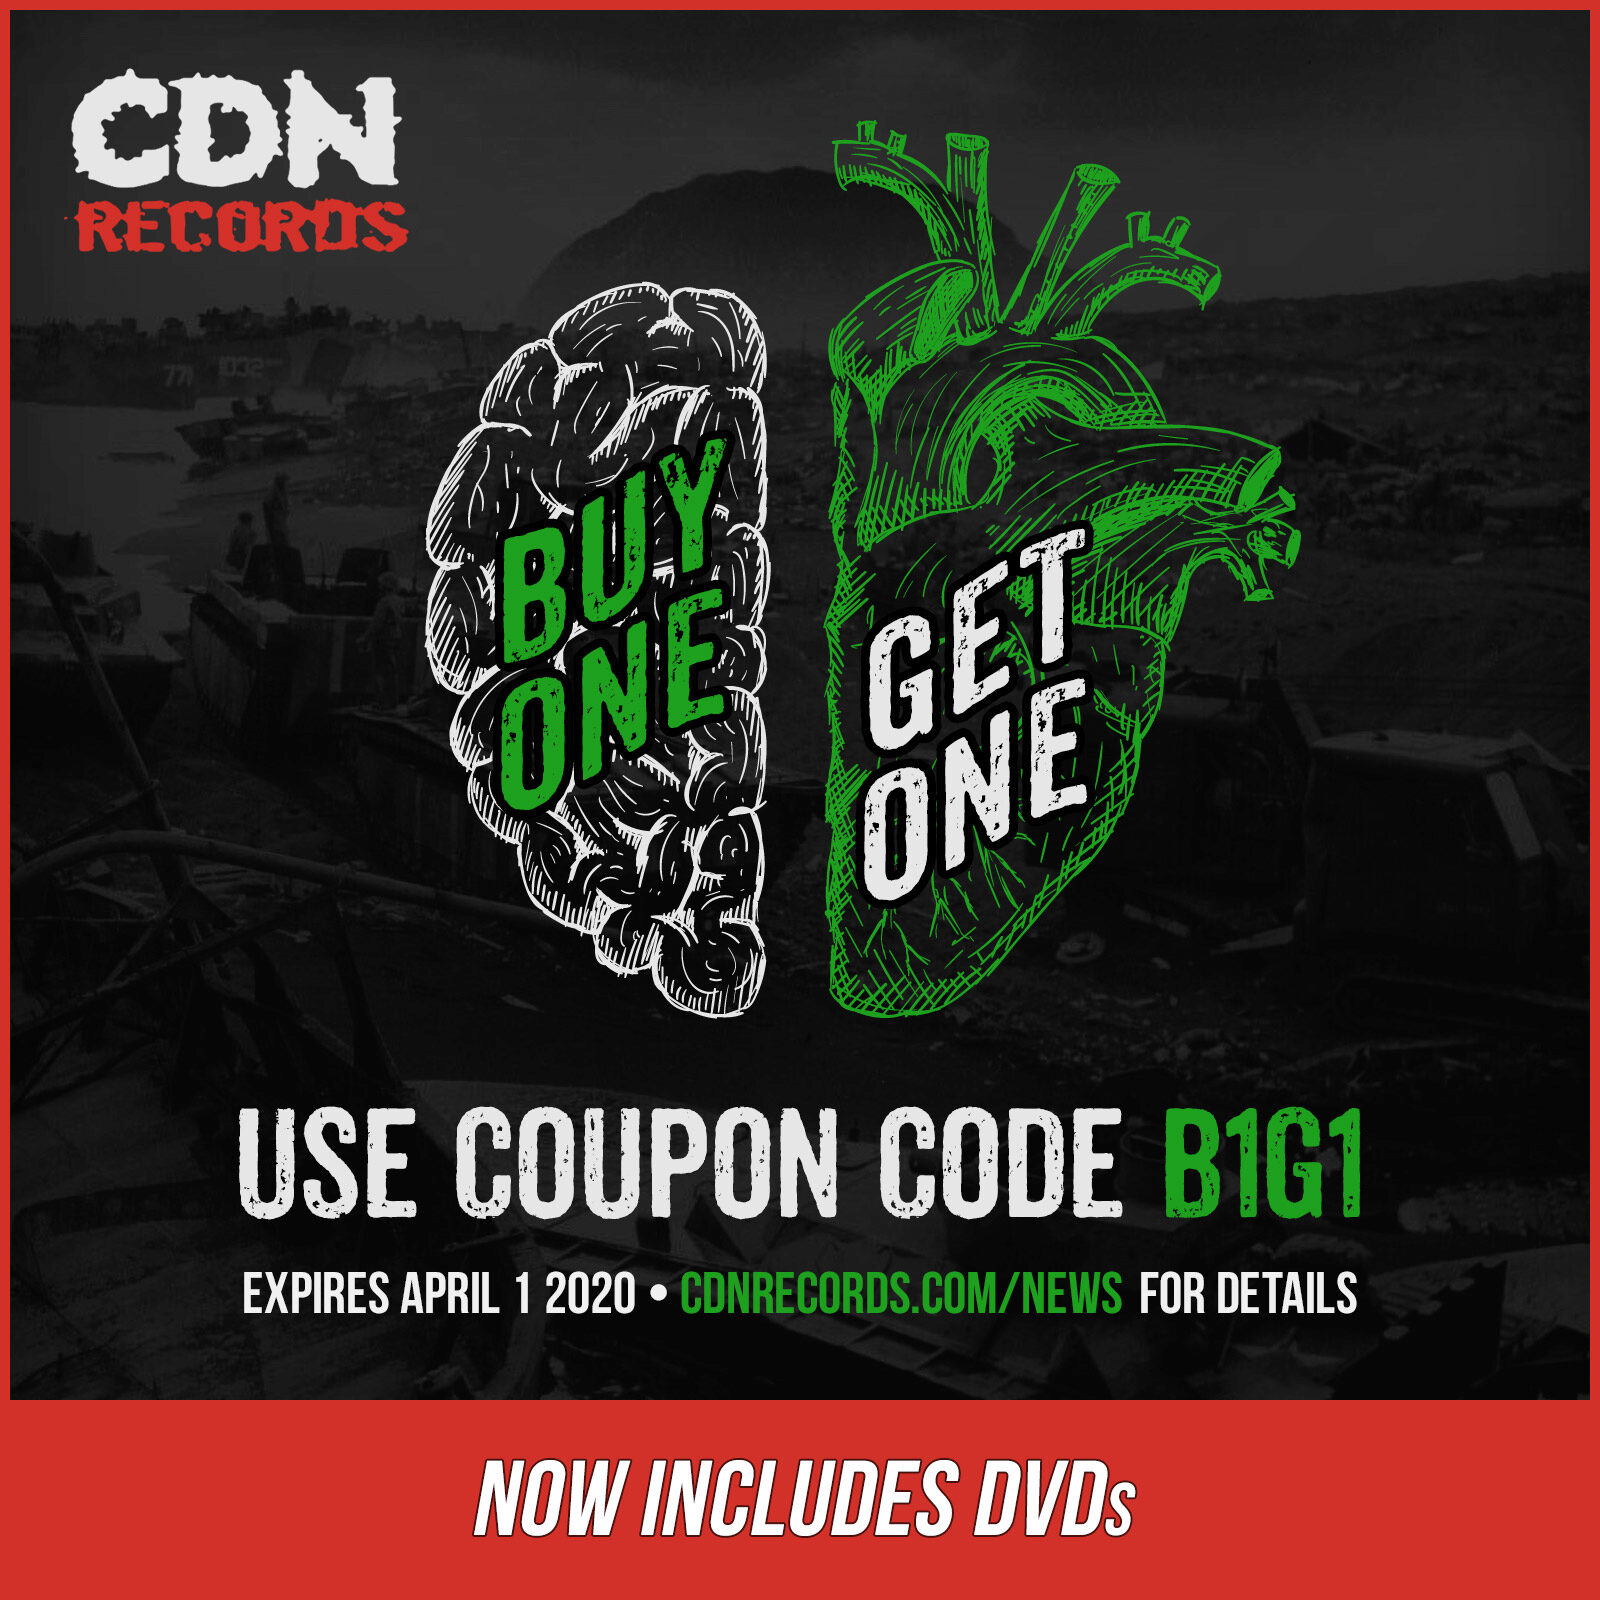 Updated promo graphic for B1G1 coupon code